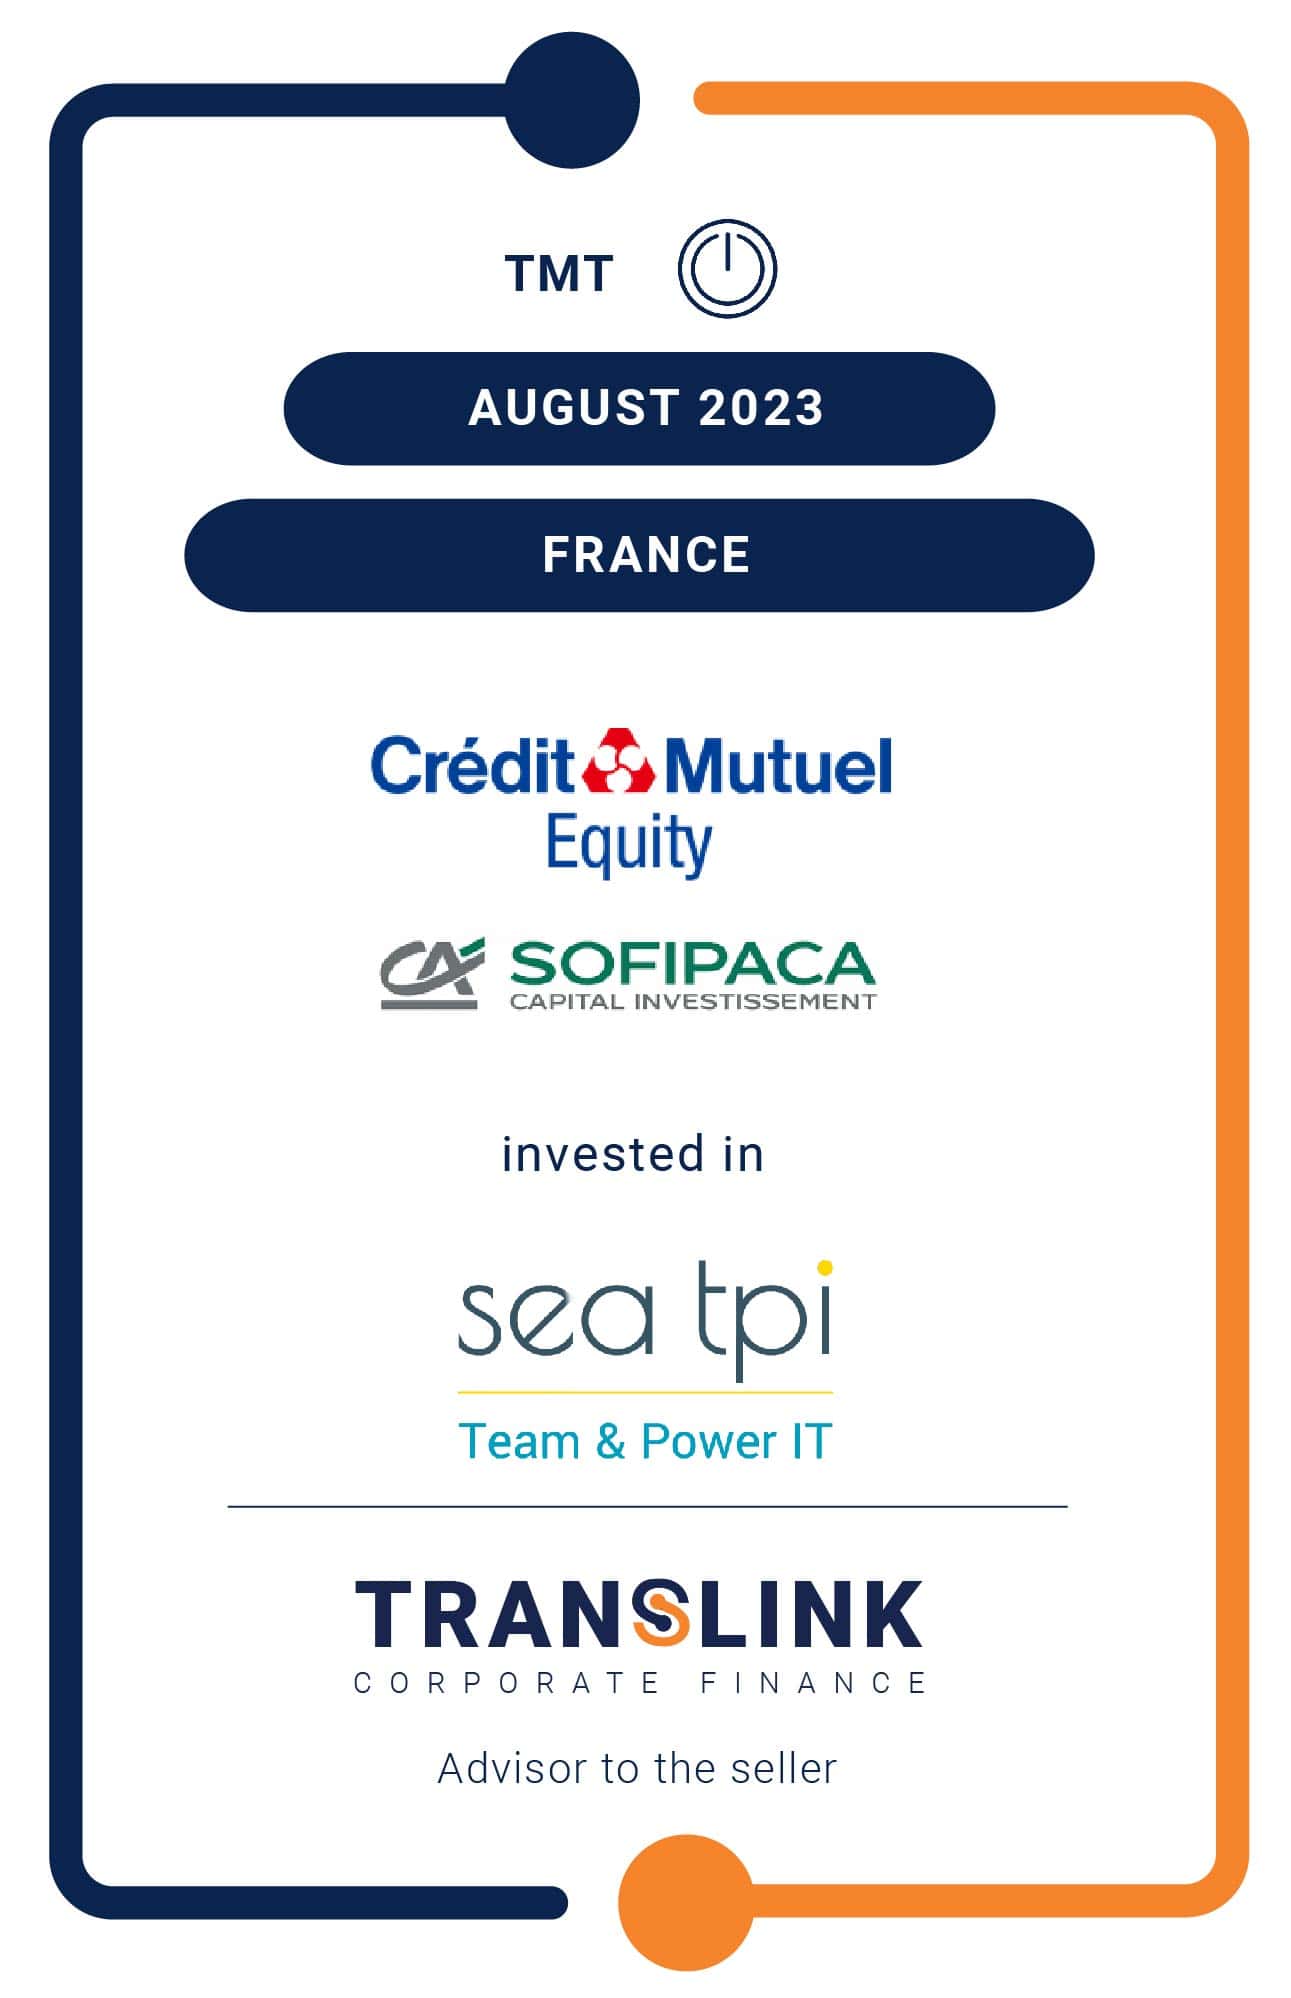 Translink Corporate Finance acted as the exclusive advisor to SEA TPI in selling a minority stake to Crédit Mutuel Equity and SOFIPACA